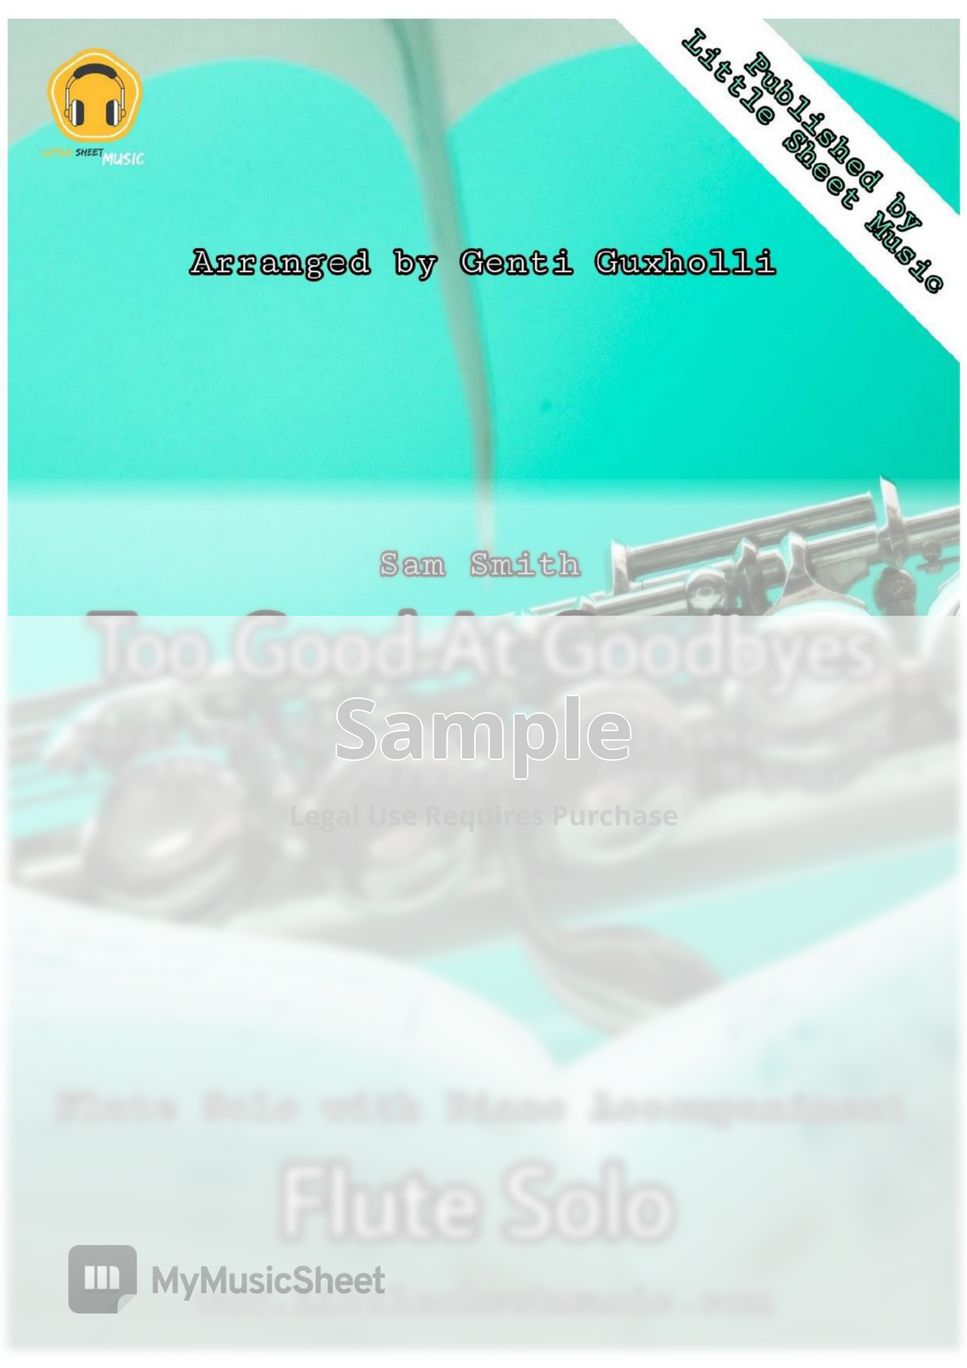 Sam Smith - Too Good At Goodbyes (Flute Solo with Piano Accompaniment) by Genti Guxholli